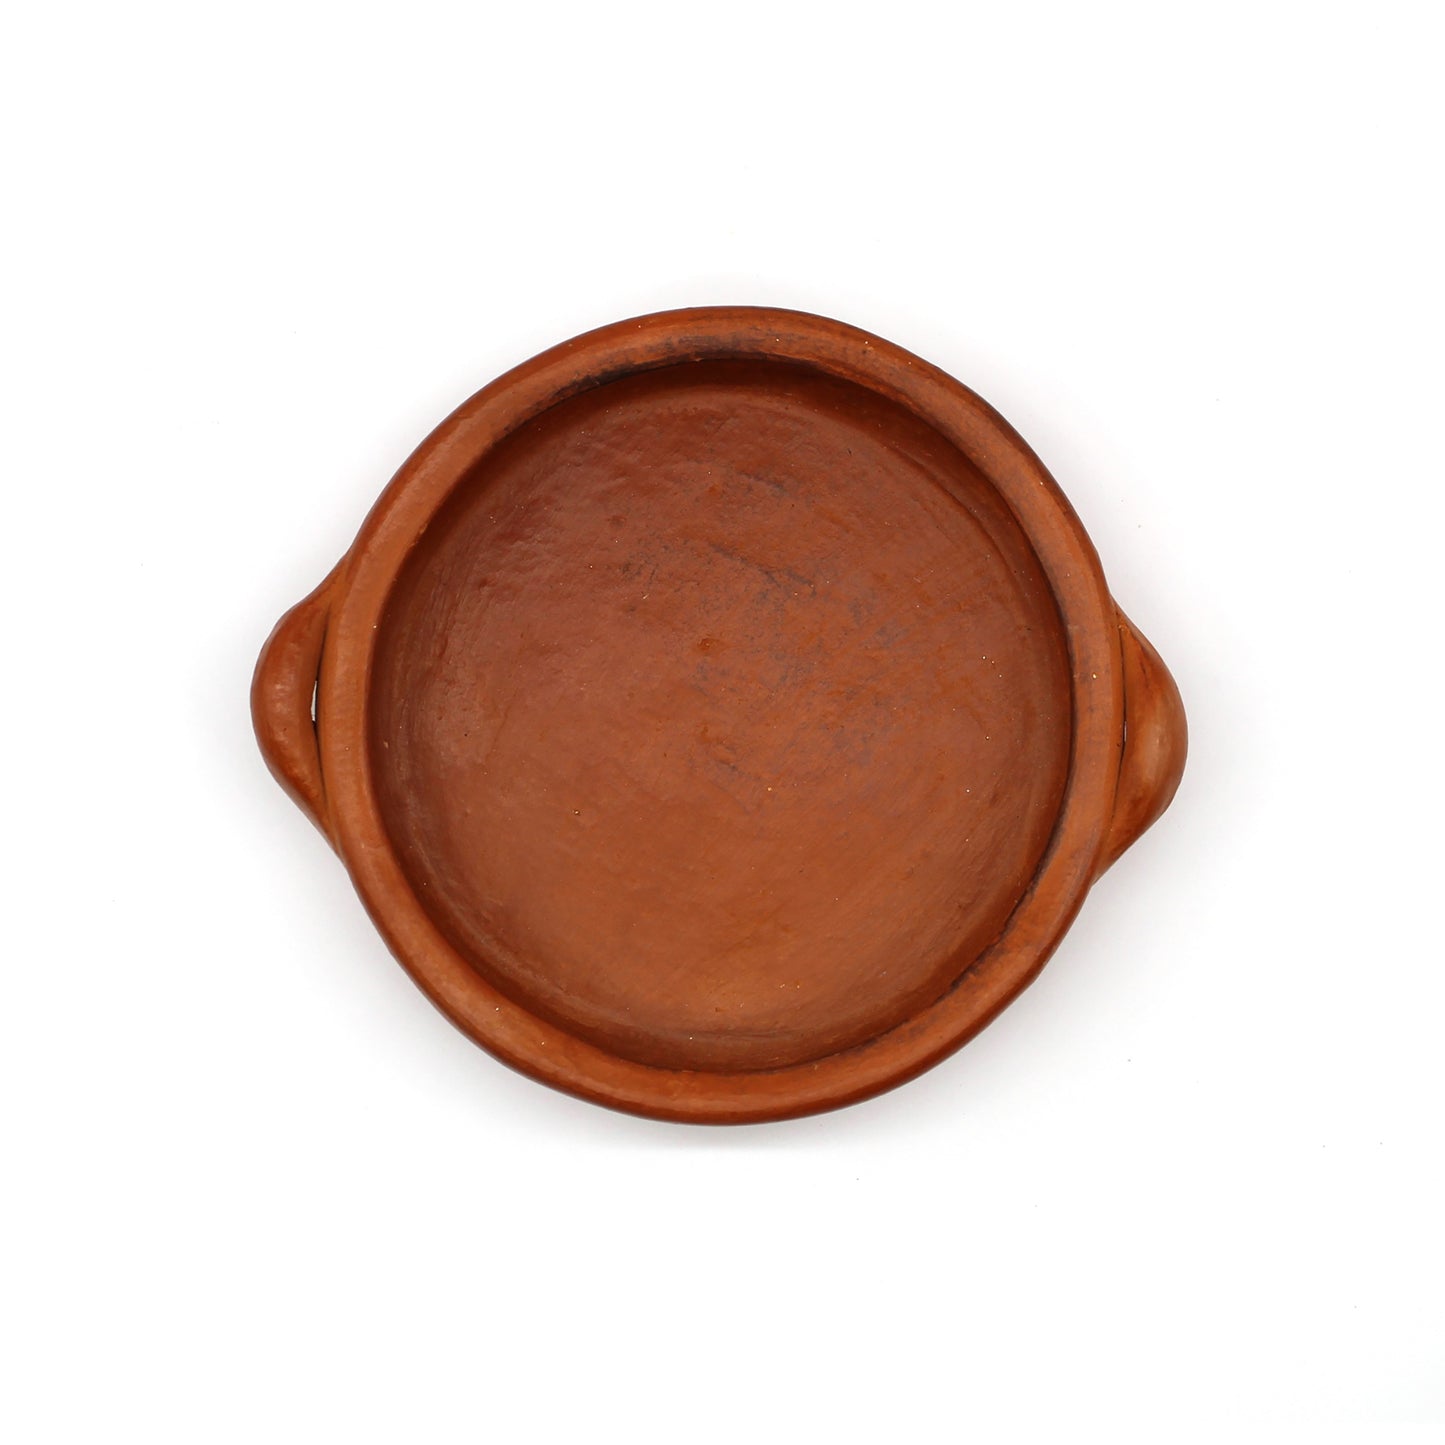 Terracotta Bowl with handles 8" set of 2